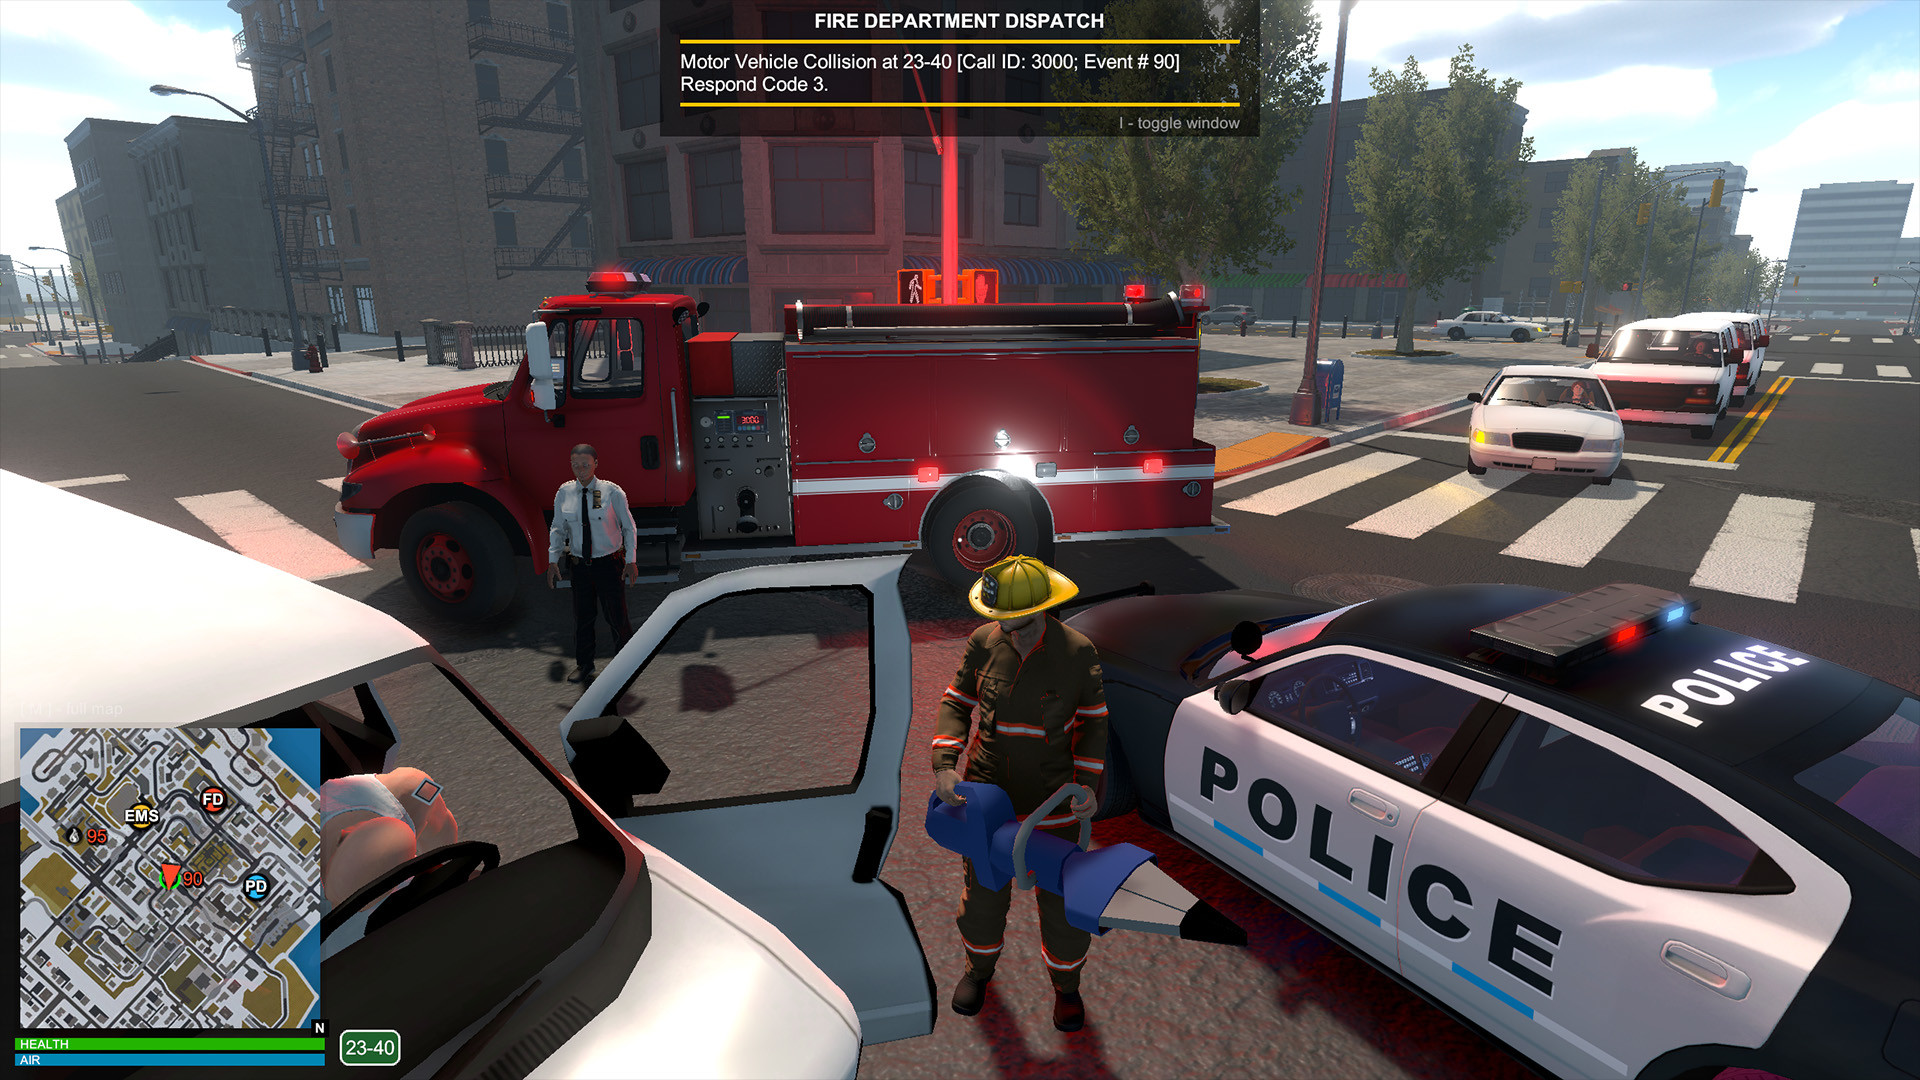 Flashing Lights - Police, Firefighting, Emergency Services Simulator on  Steam